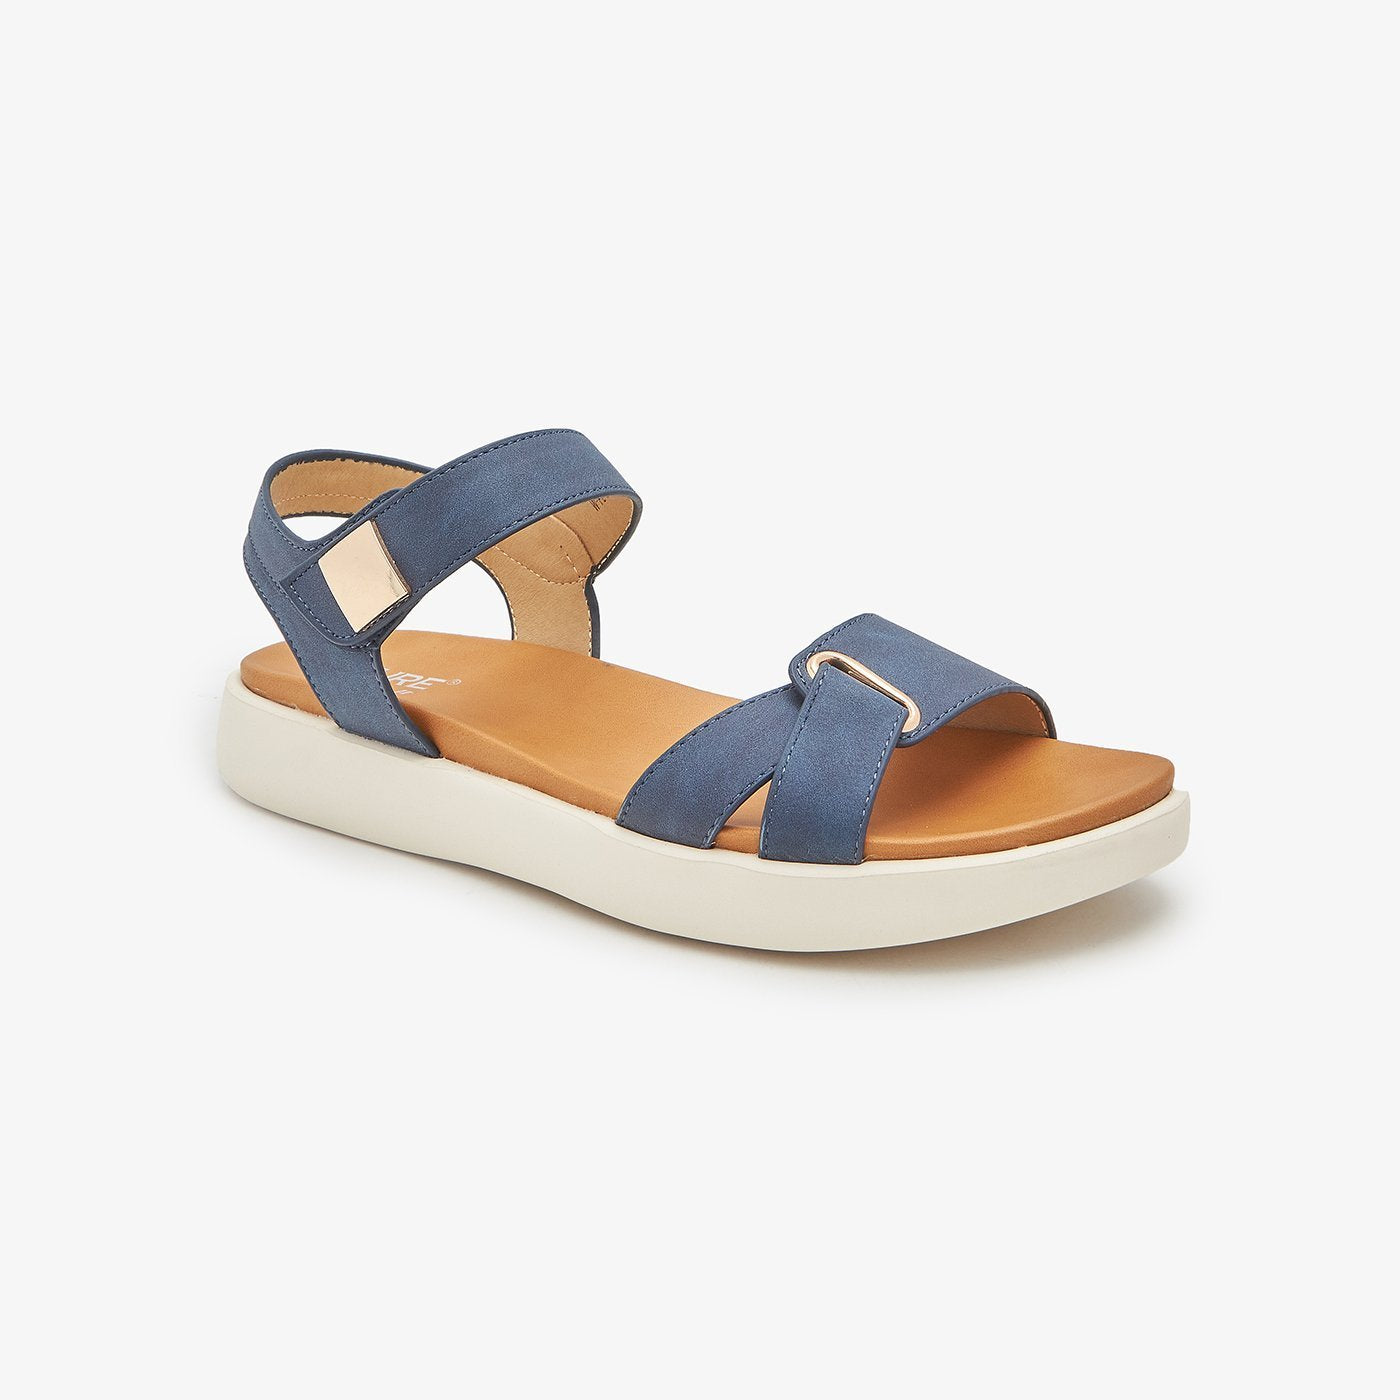 Ultra Comfortable Sandals for Women